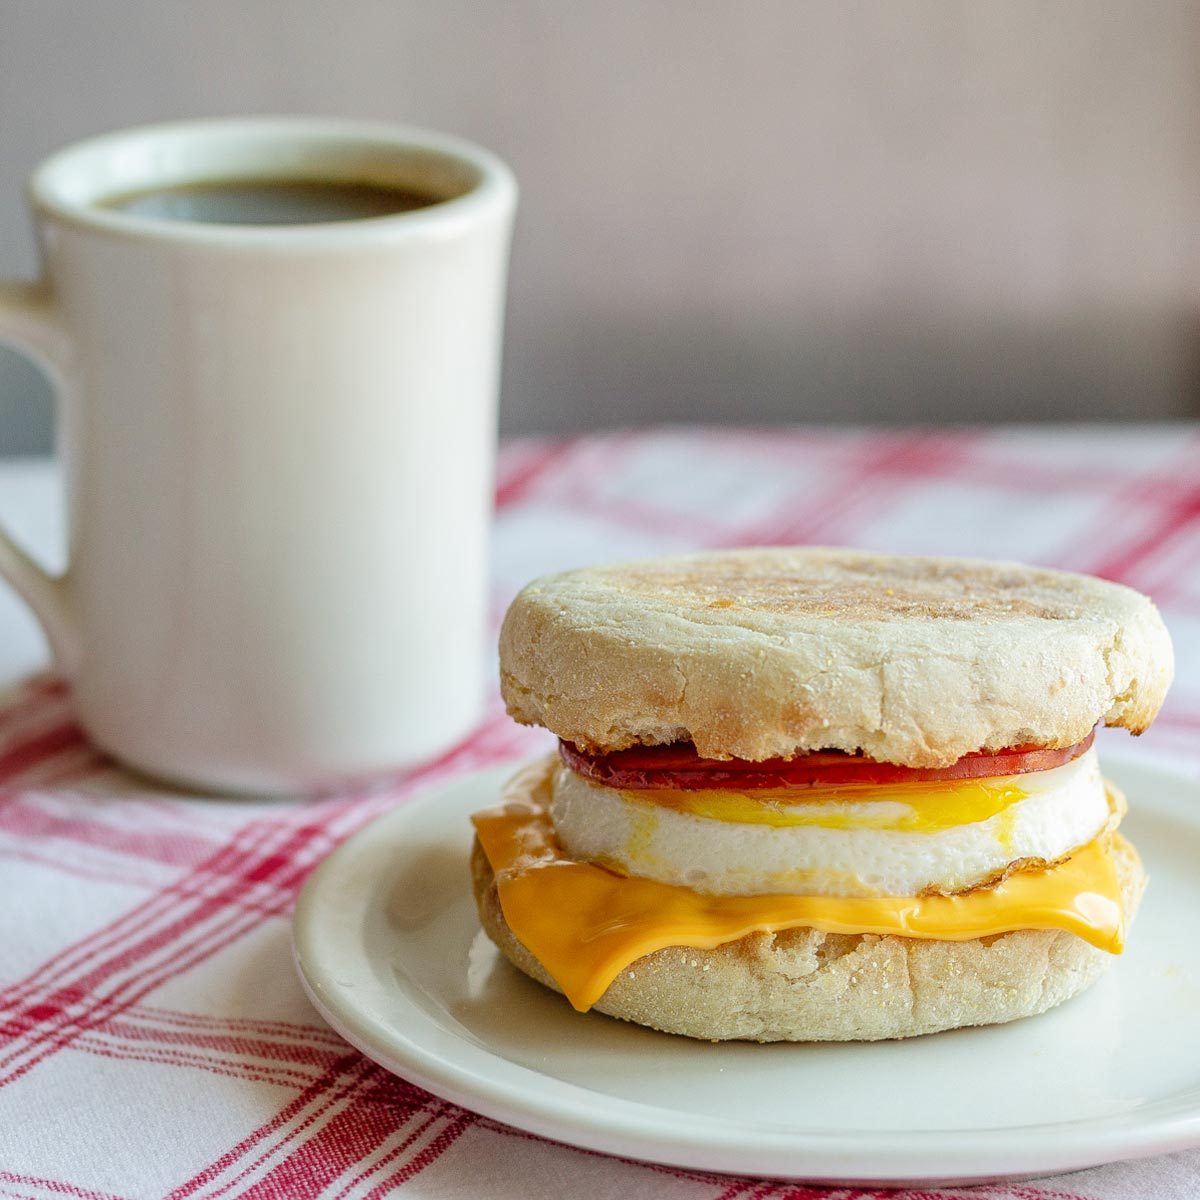 Make Your Own Egg McMuffin